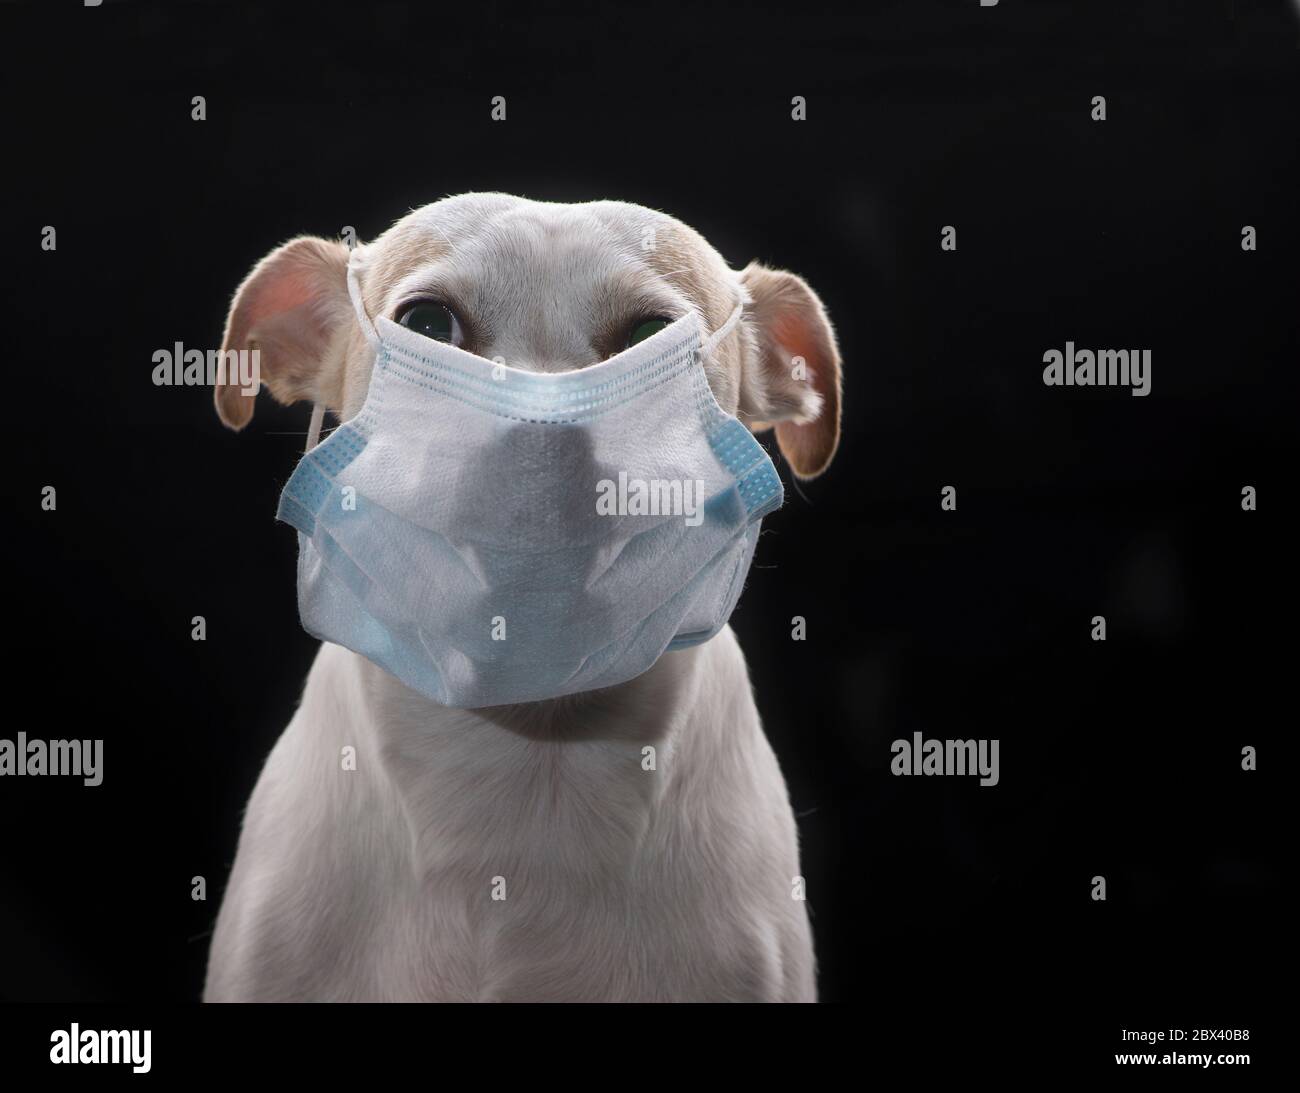 A white small breed dog wearing face cover or face mask. COVID 19 pandemic concept, in a black background Stock Photo